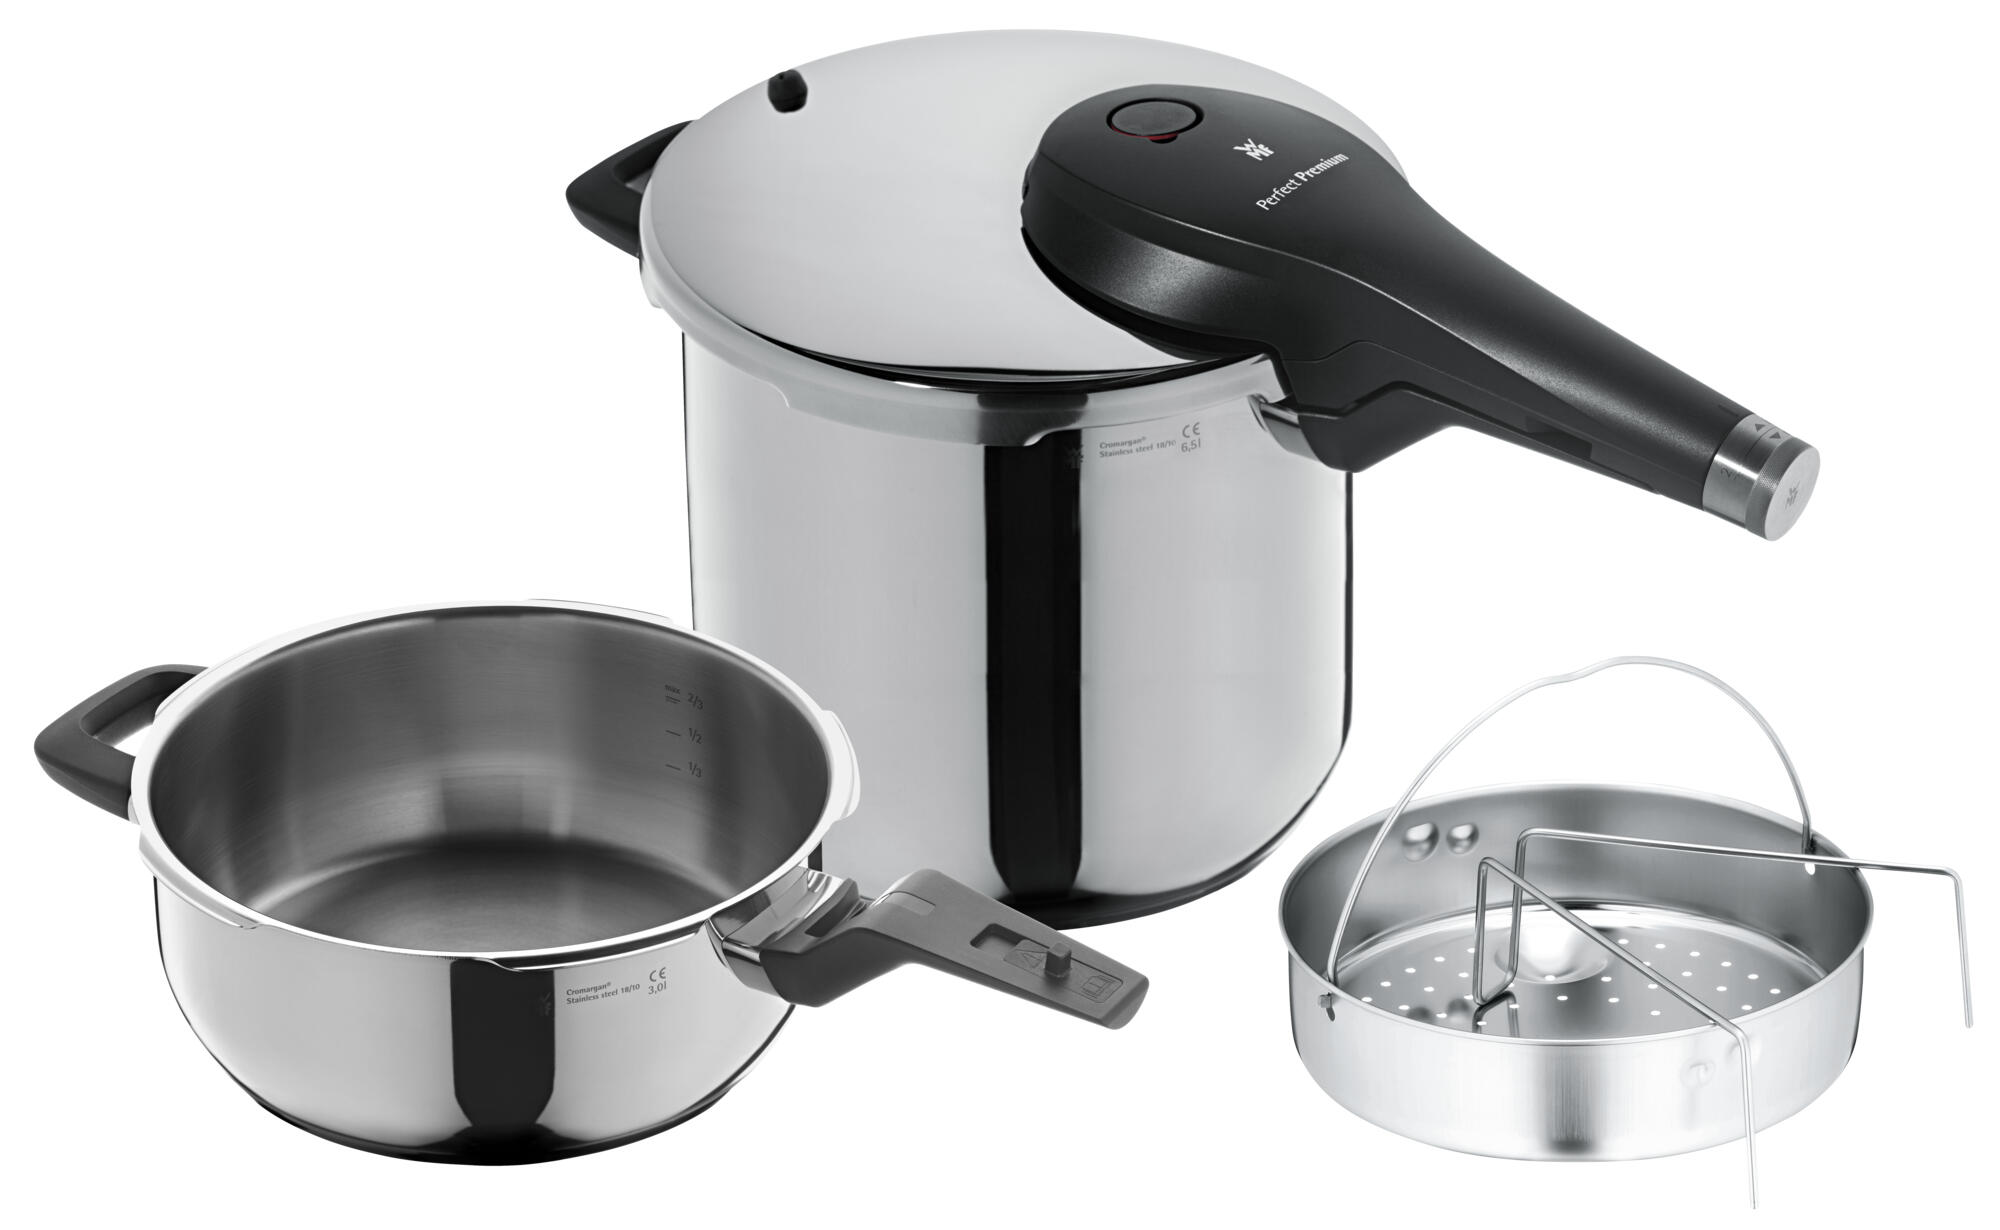 WMF Perfect Premium One Pot Pressure Cooker Set, 6.5 L and 3 L with steam basket